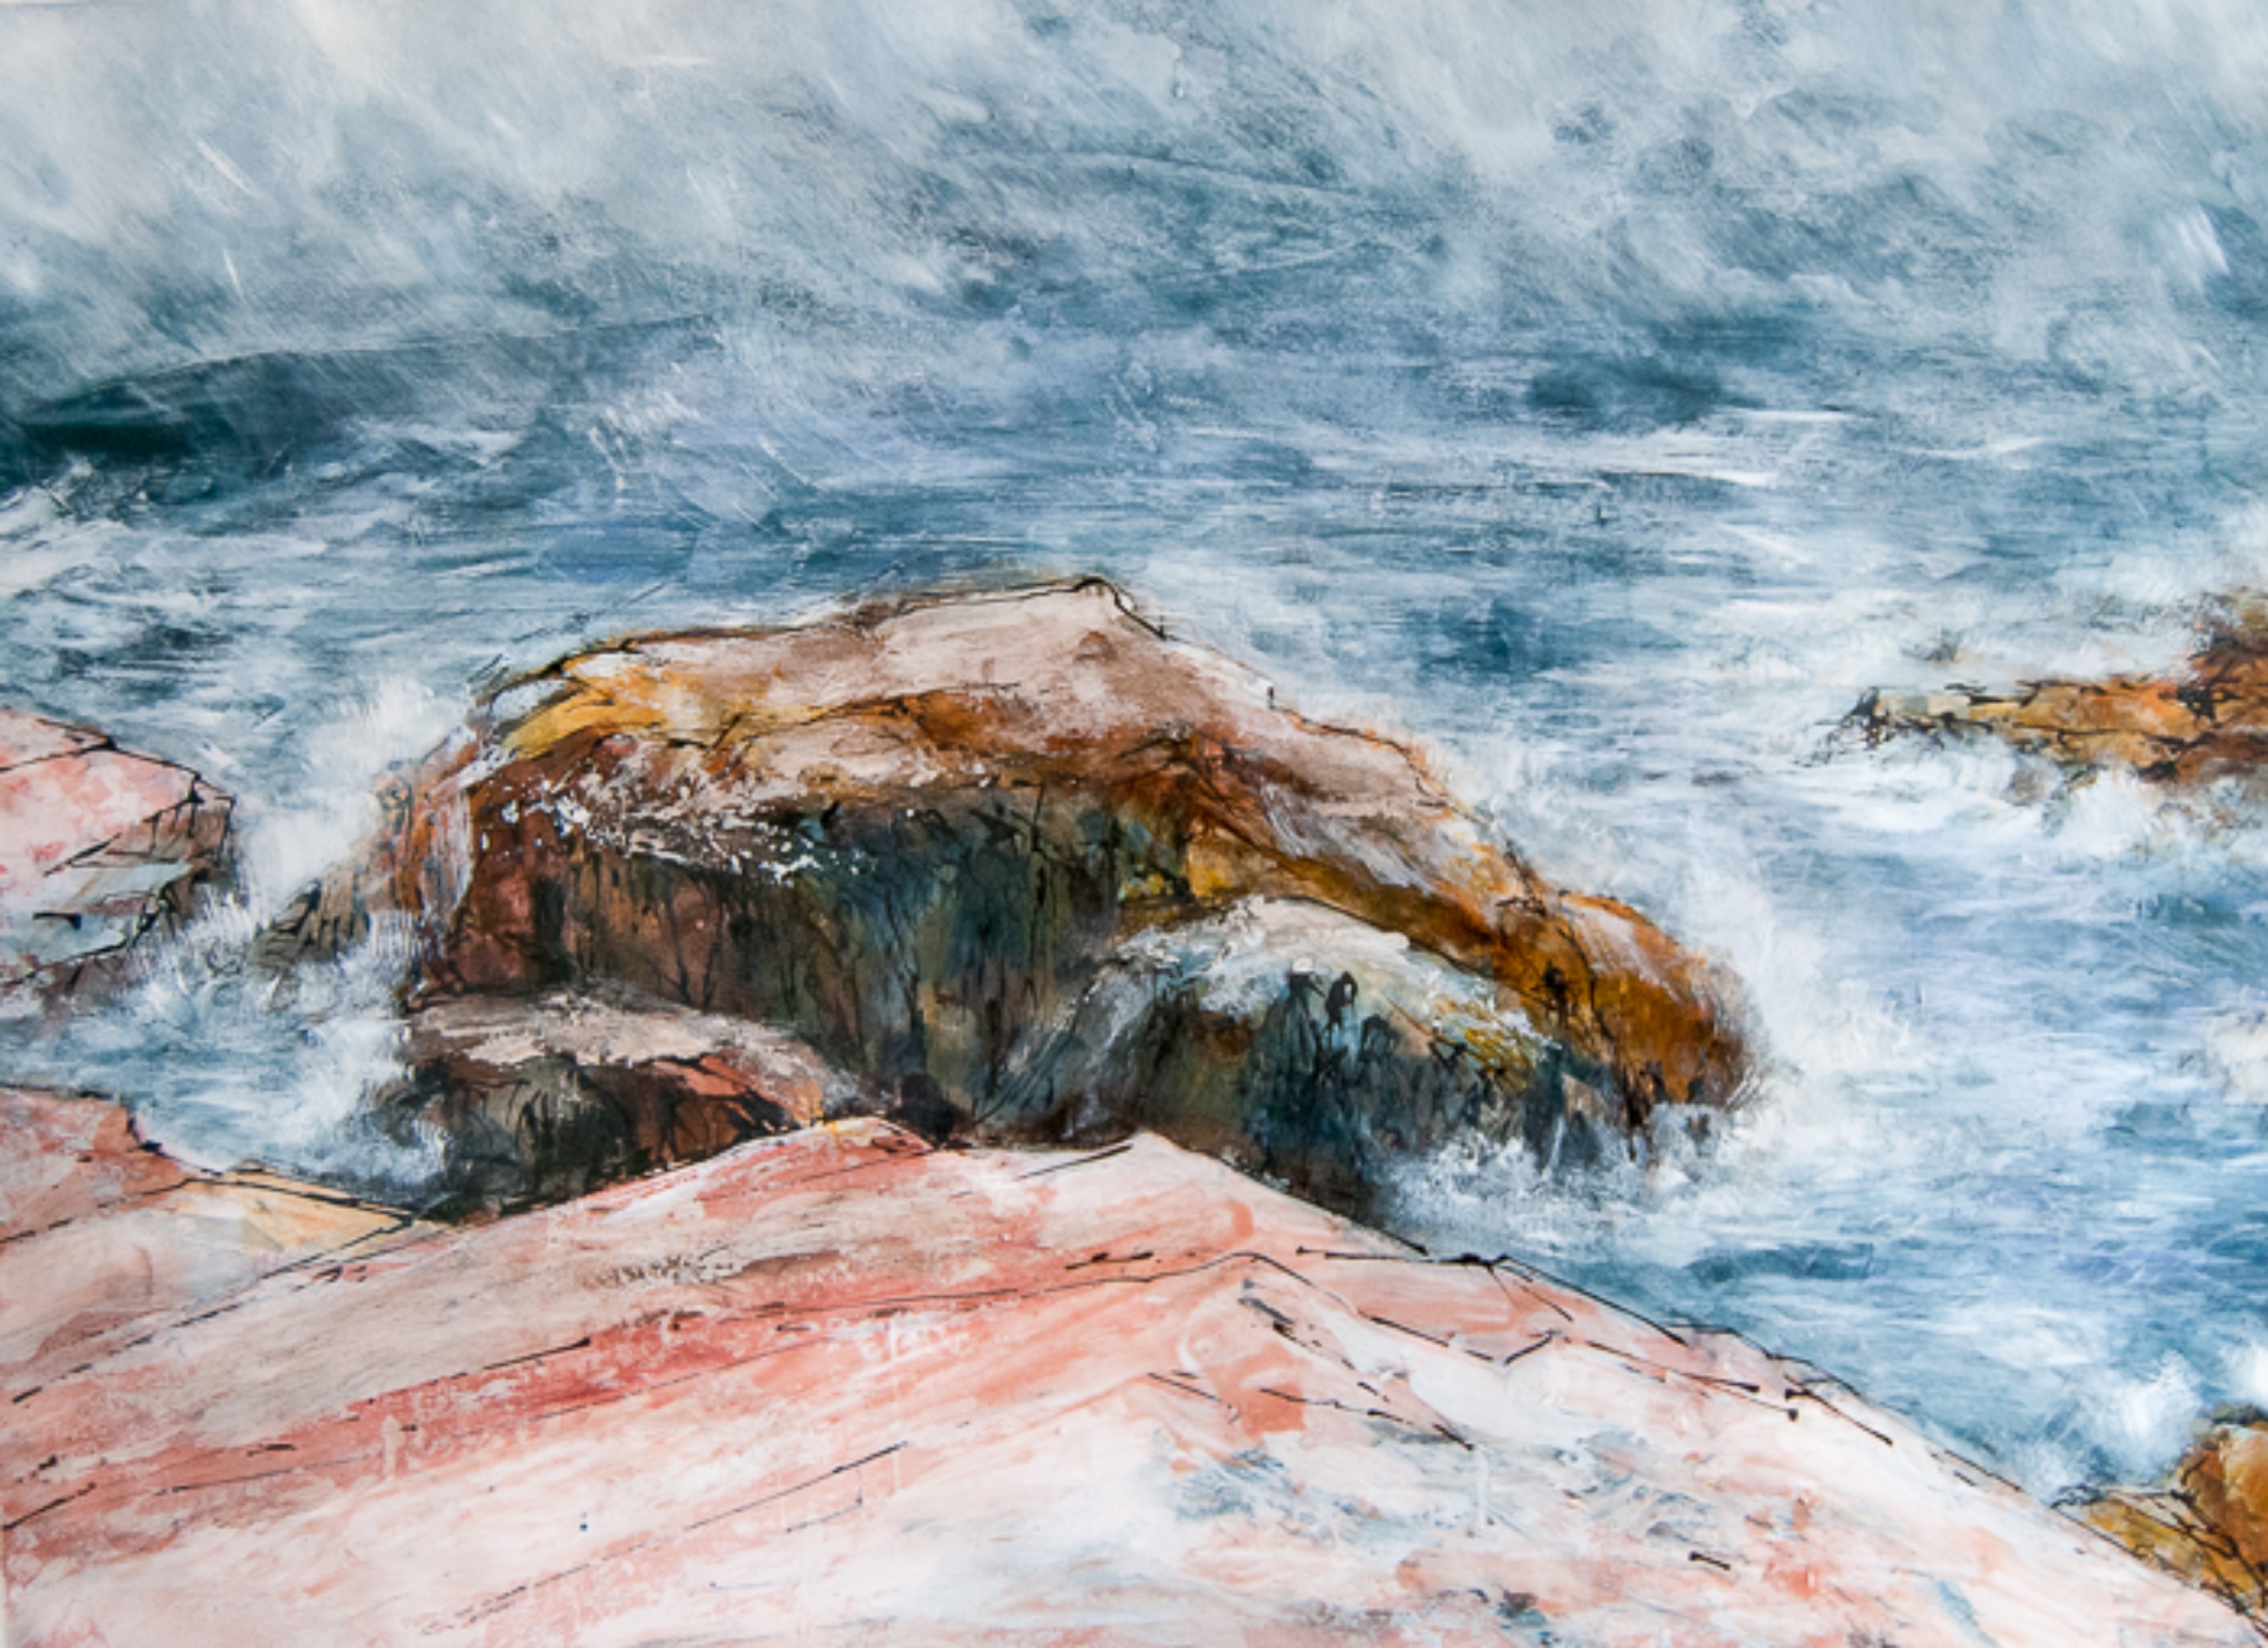  Rock Tempest, Schoodic ME, Watercolor, pencil and ink with acrylic on paper, 2014 47" x 33 1/4" 